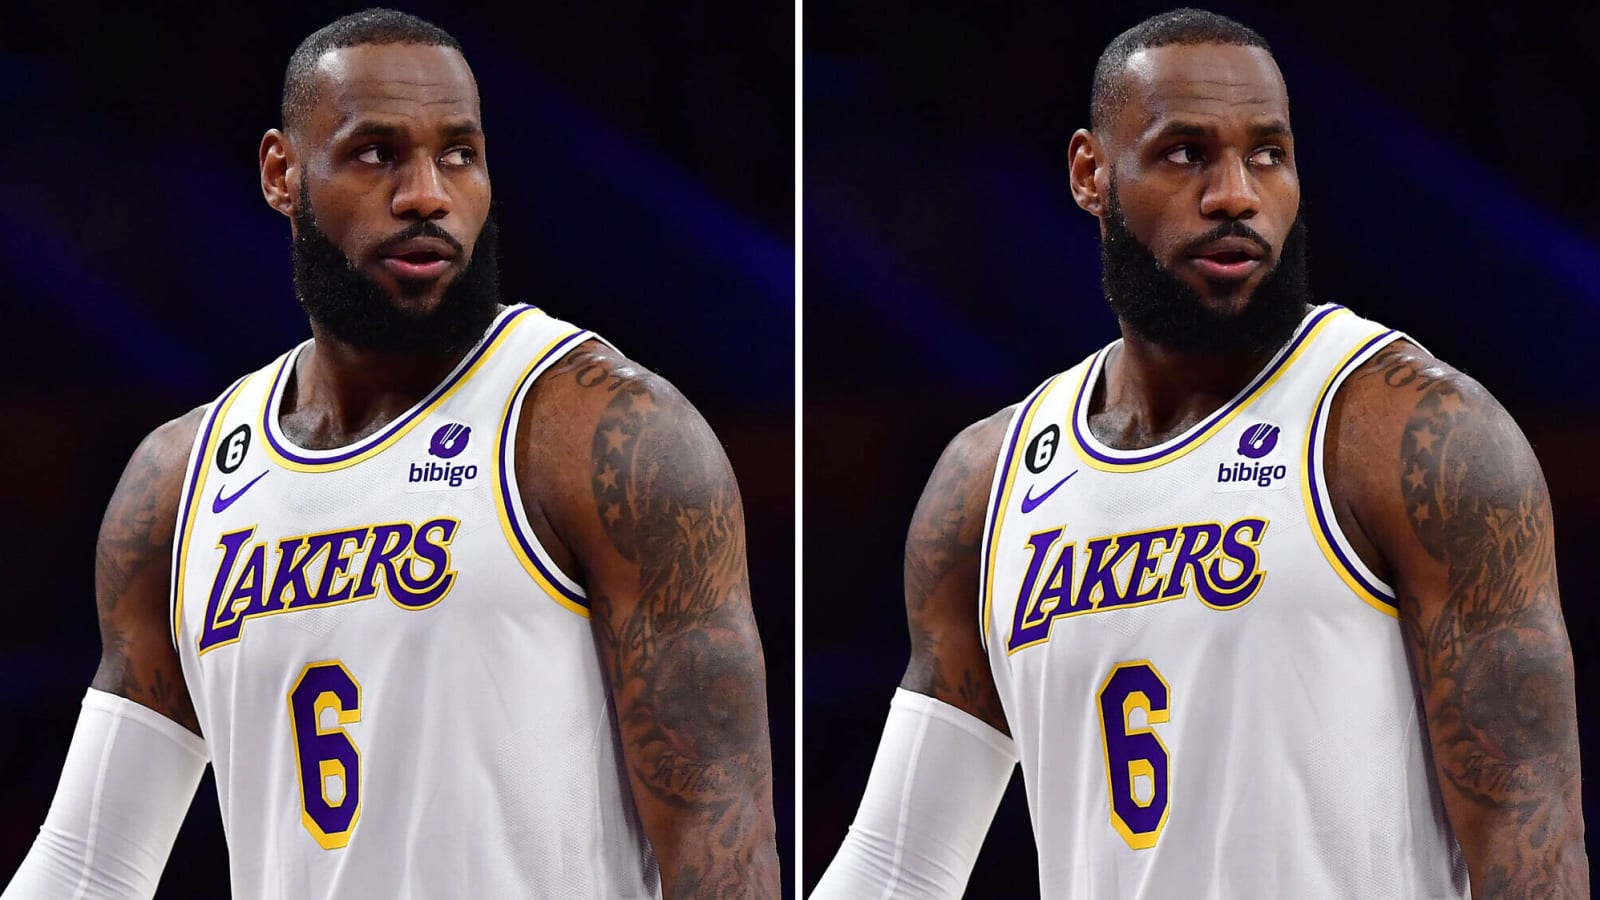 Double Vision: Lakers’ LeBron James serves notice